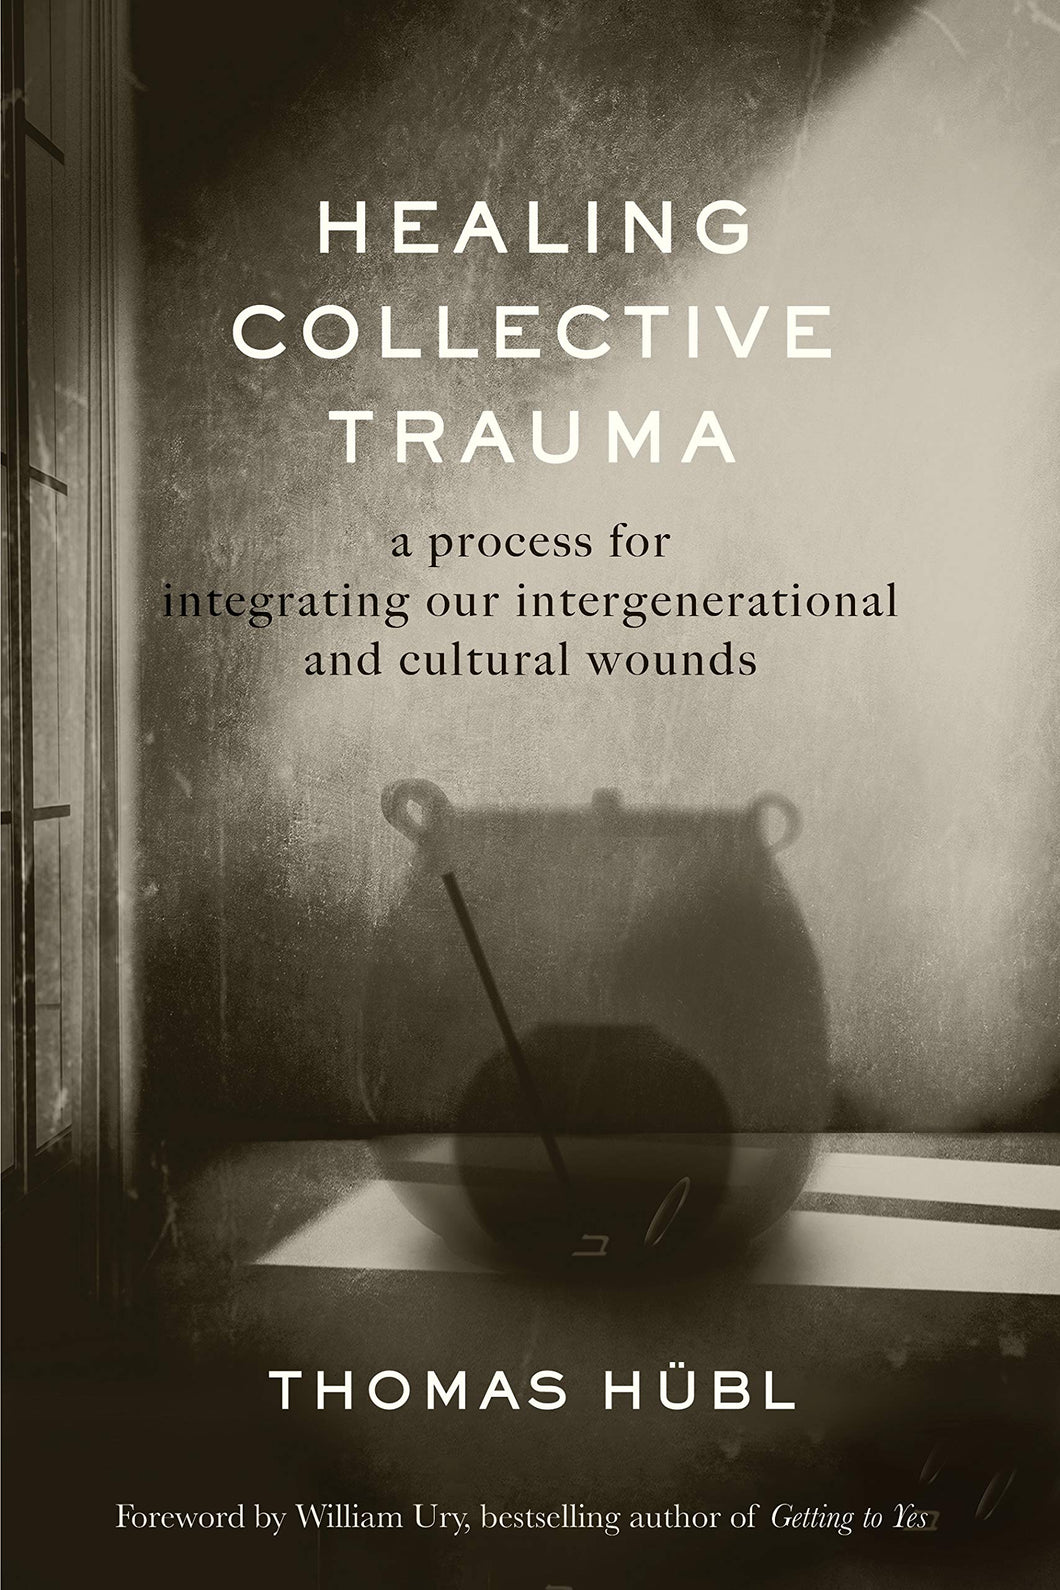 Healing Collective Trauma: A Process For Integrating Our Intergenerational & Cultural Wounds [Thomas Hübl]